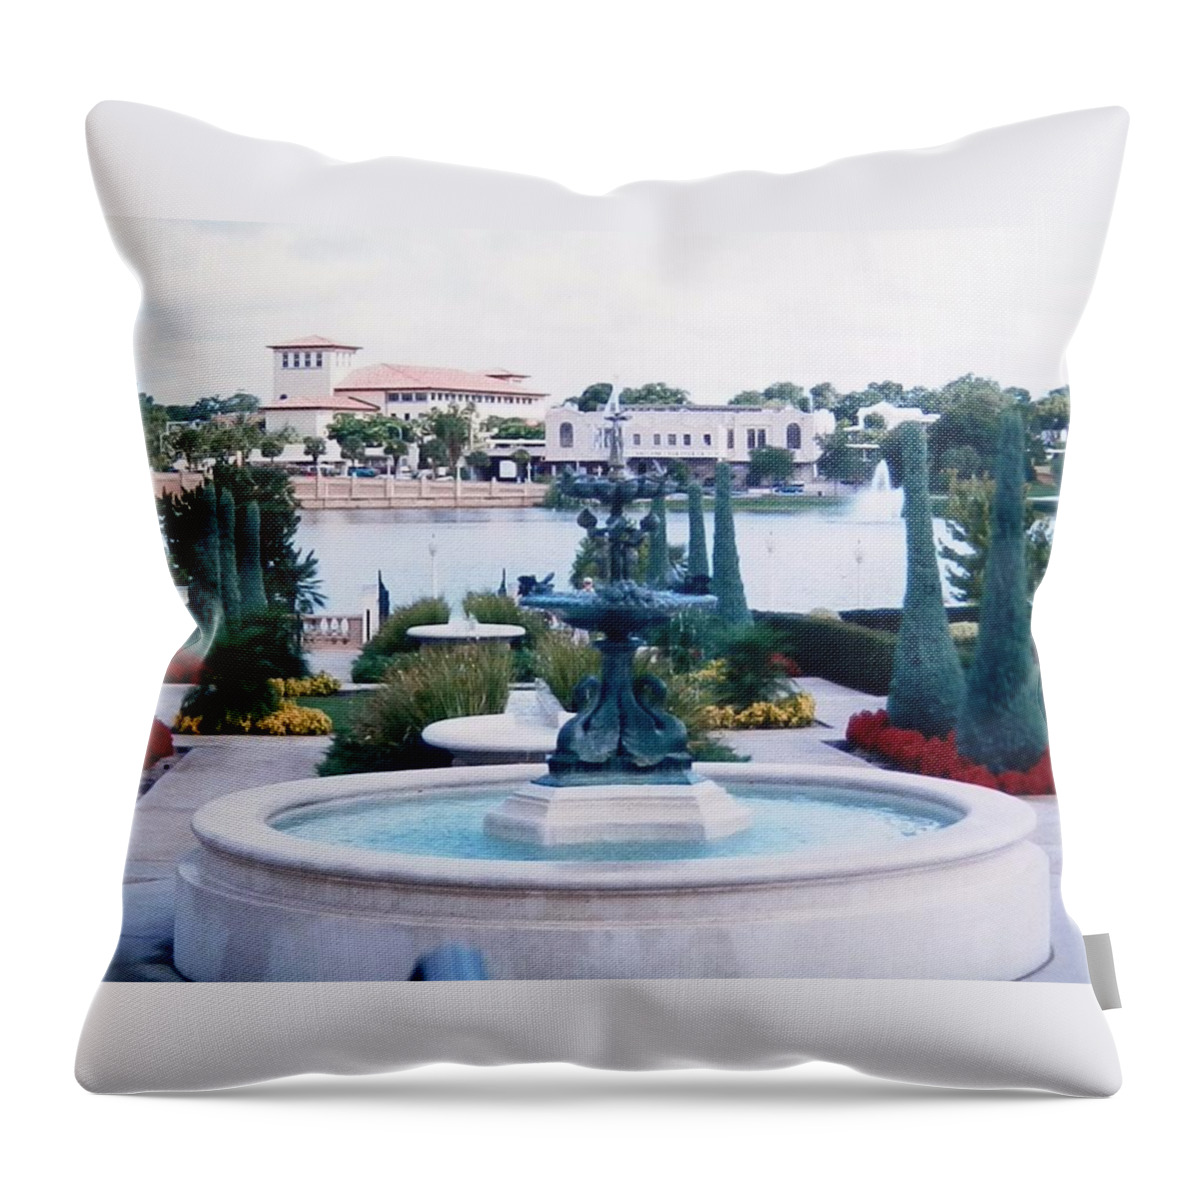 #lakeland #lakemirror #park #downtown #city #beautiful #plantsflowers #rentable #afternoon #summertime Throw Pillow featuring the photograph Beautiful Park in Lakeland by Belinda Lee